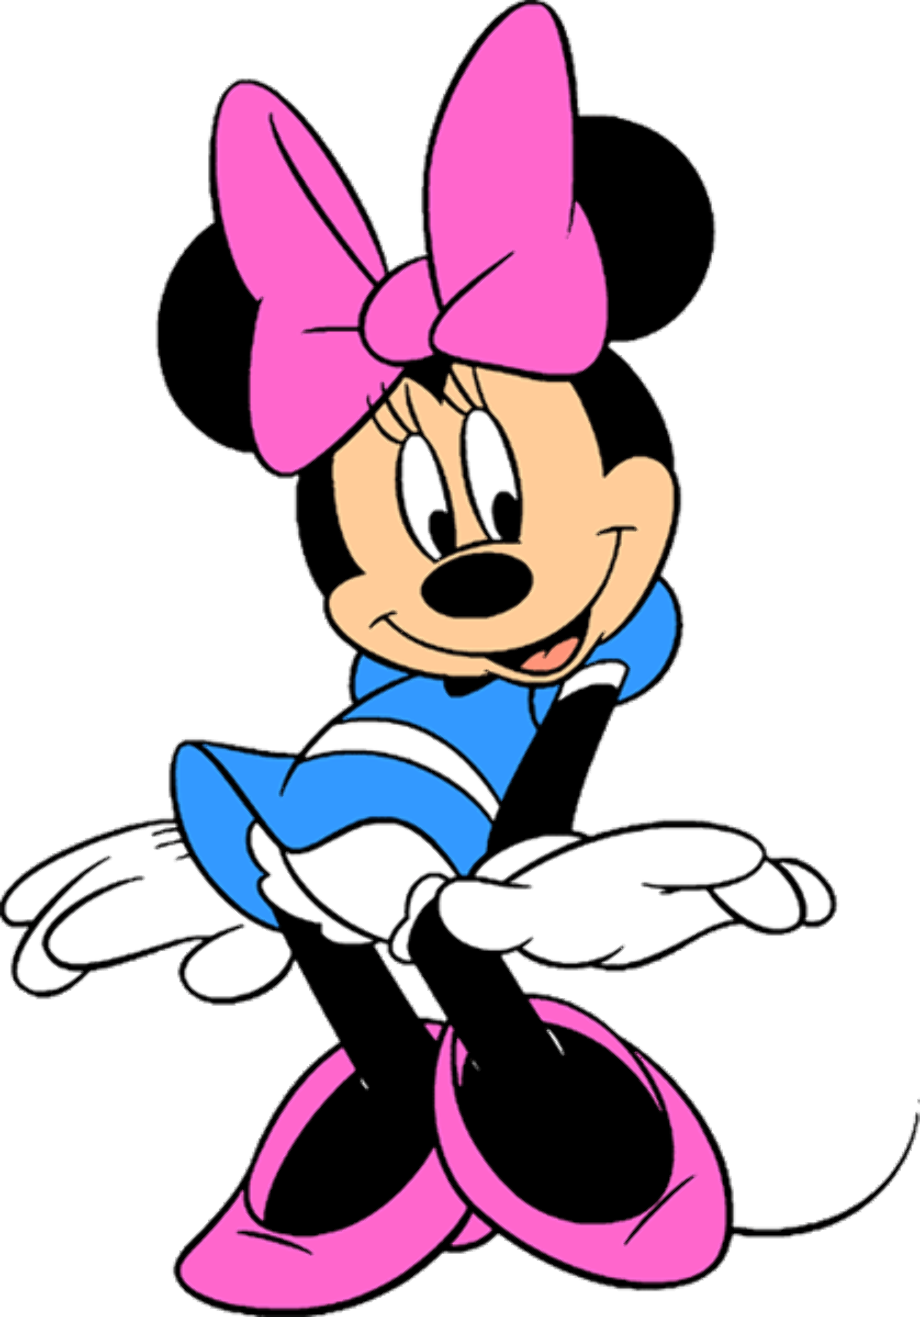 Minnie Mouse Peeking Vector Minnie Mouse Logo Vector Image Svg Psd Png